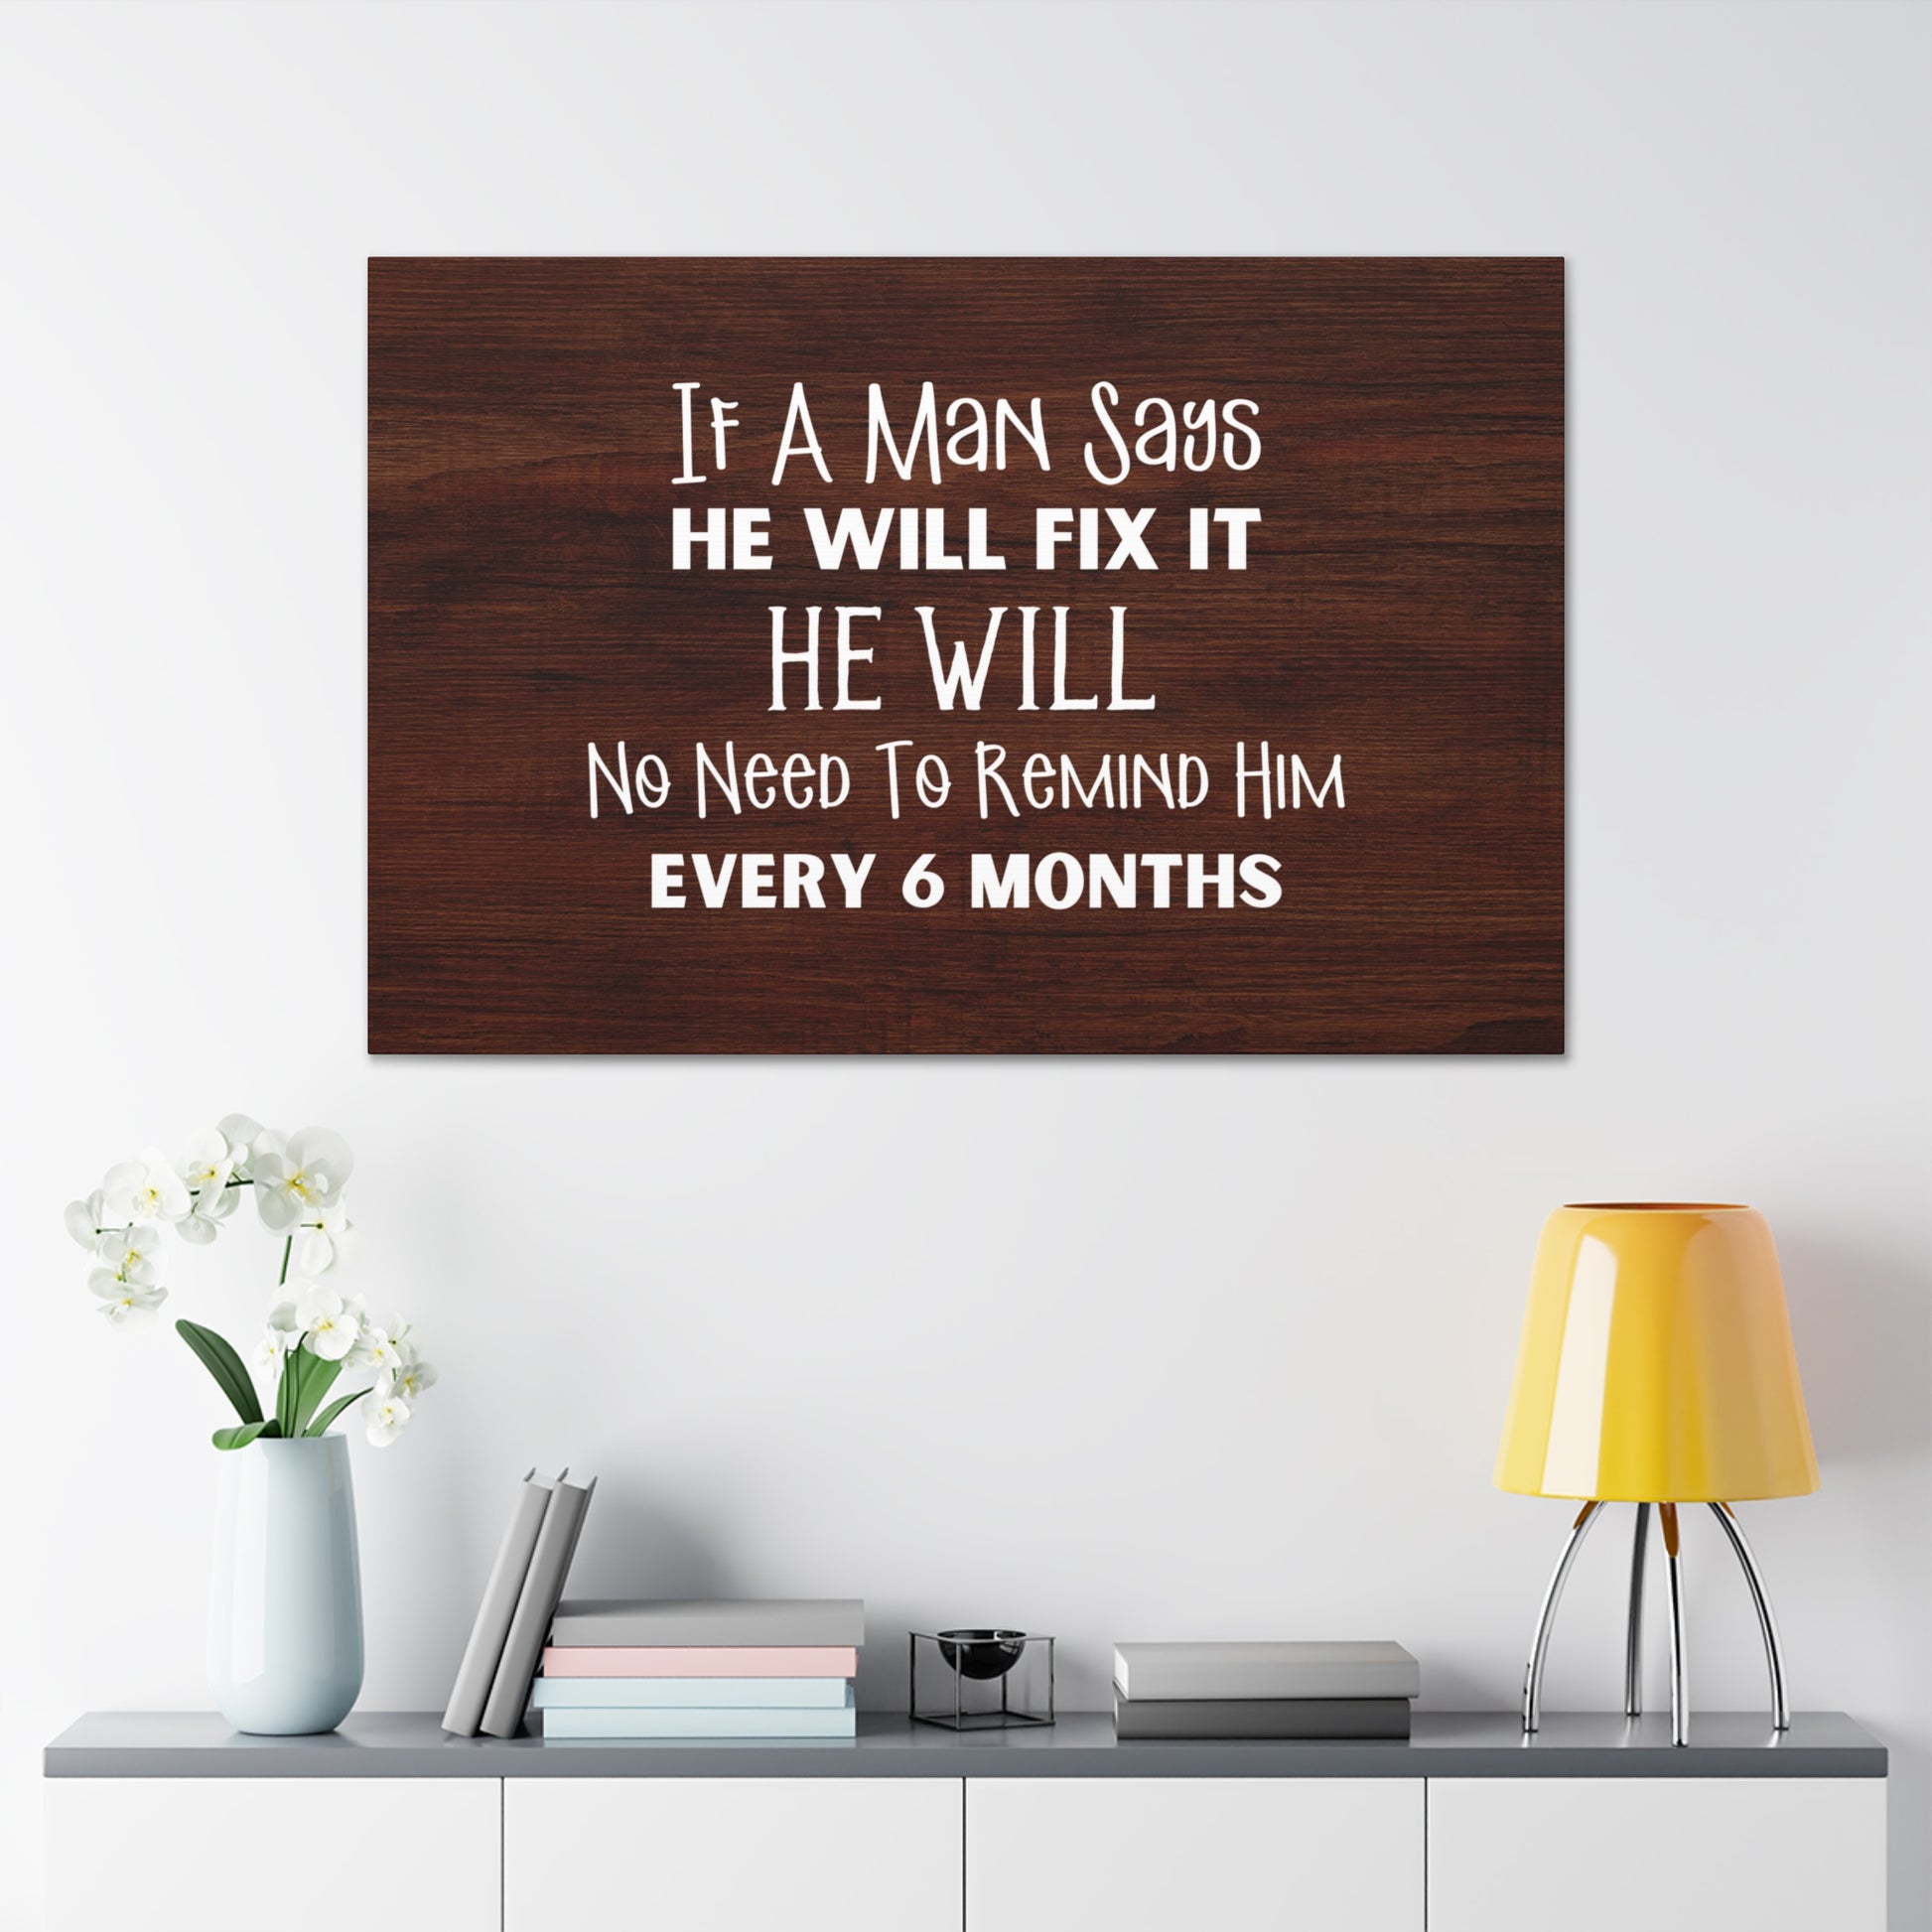 "If A Man Says He Will Fix It, He Will" Wall Art - Weave Got Gifts - Unique Gifts You Won’t Find Anywhere Else!